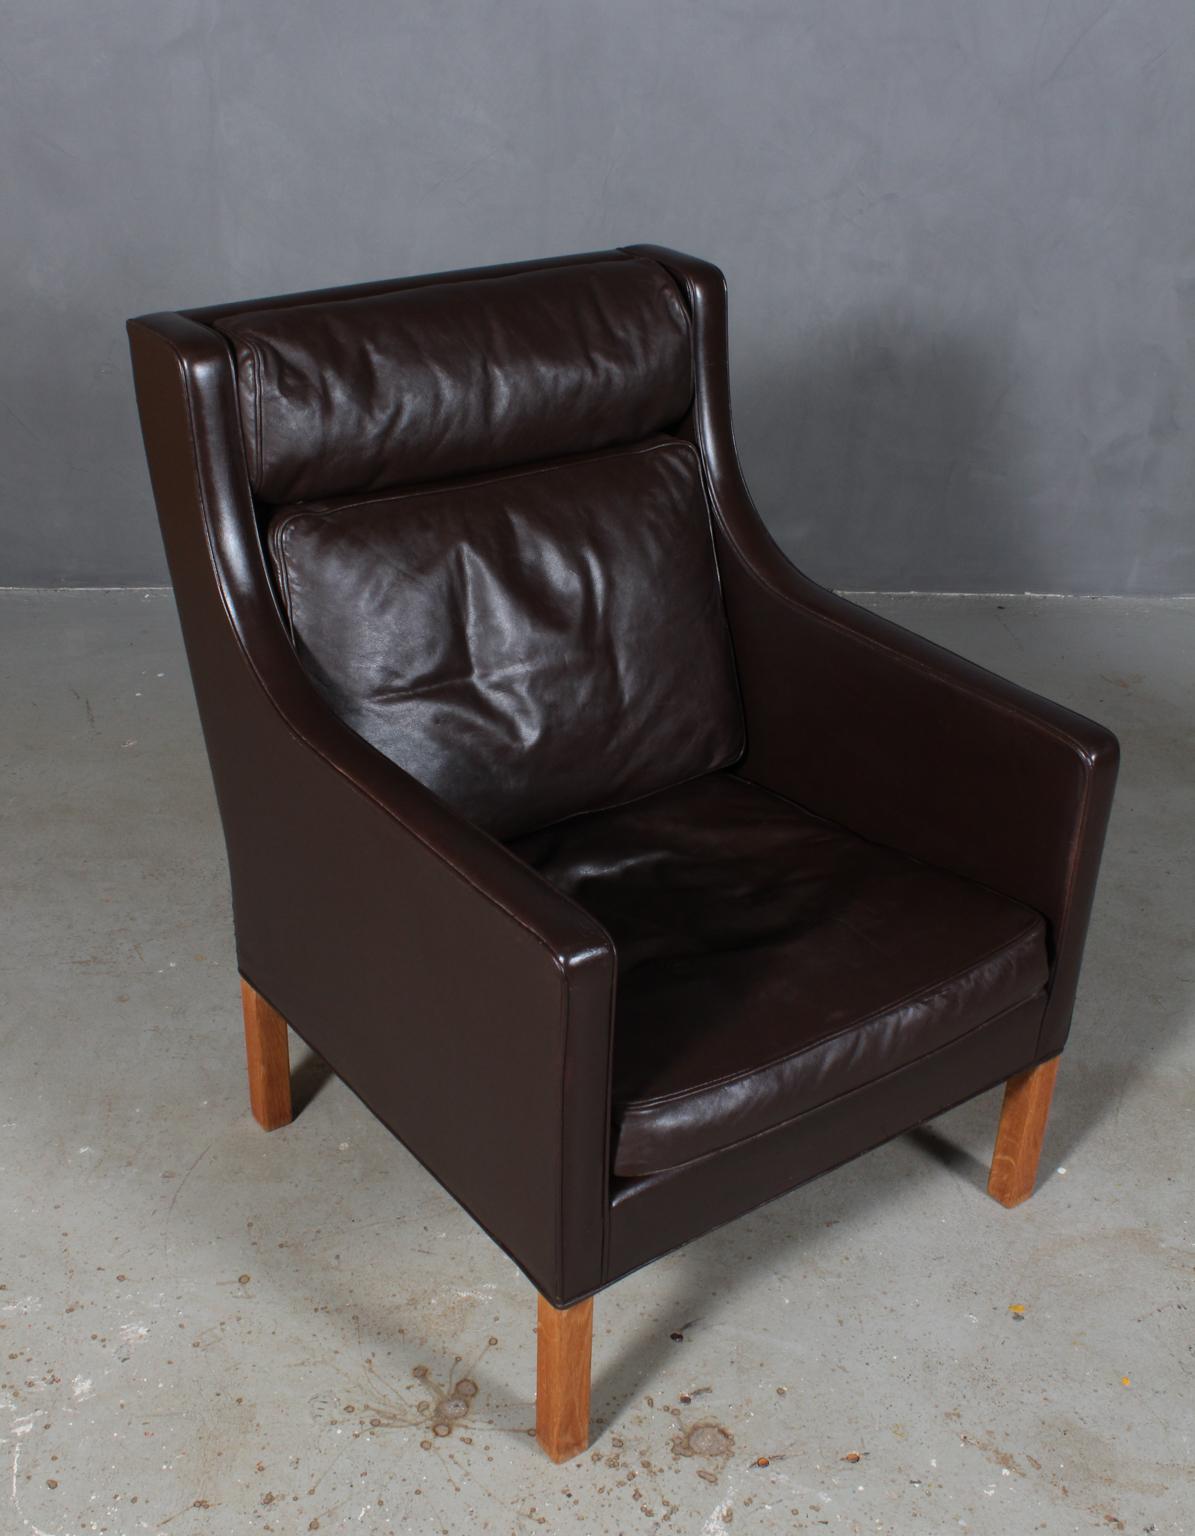 Børge & Peter Mogensen lounge chair in original brown leather upholstery. 

Legs in oak.

Model 2431, made by Fredericia furniture.

This is a cooperation between Børge Mogensen and his son Peter Mogensen.